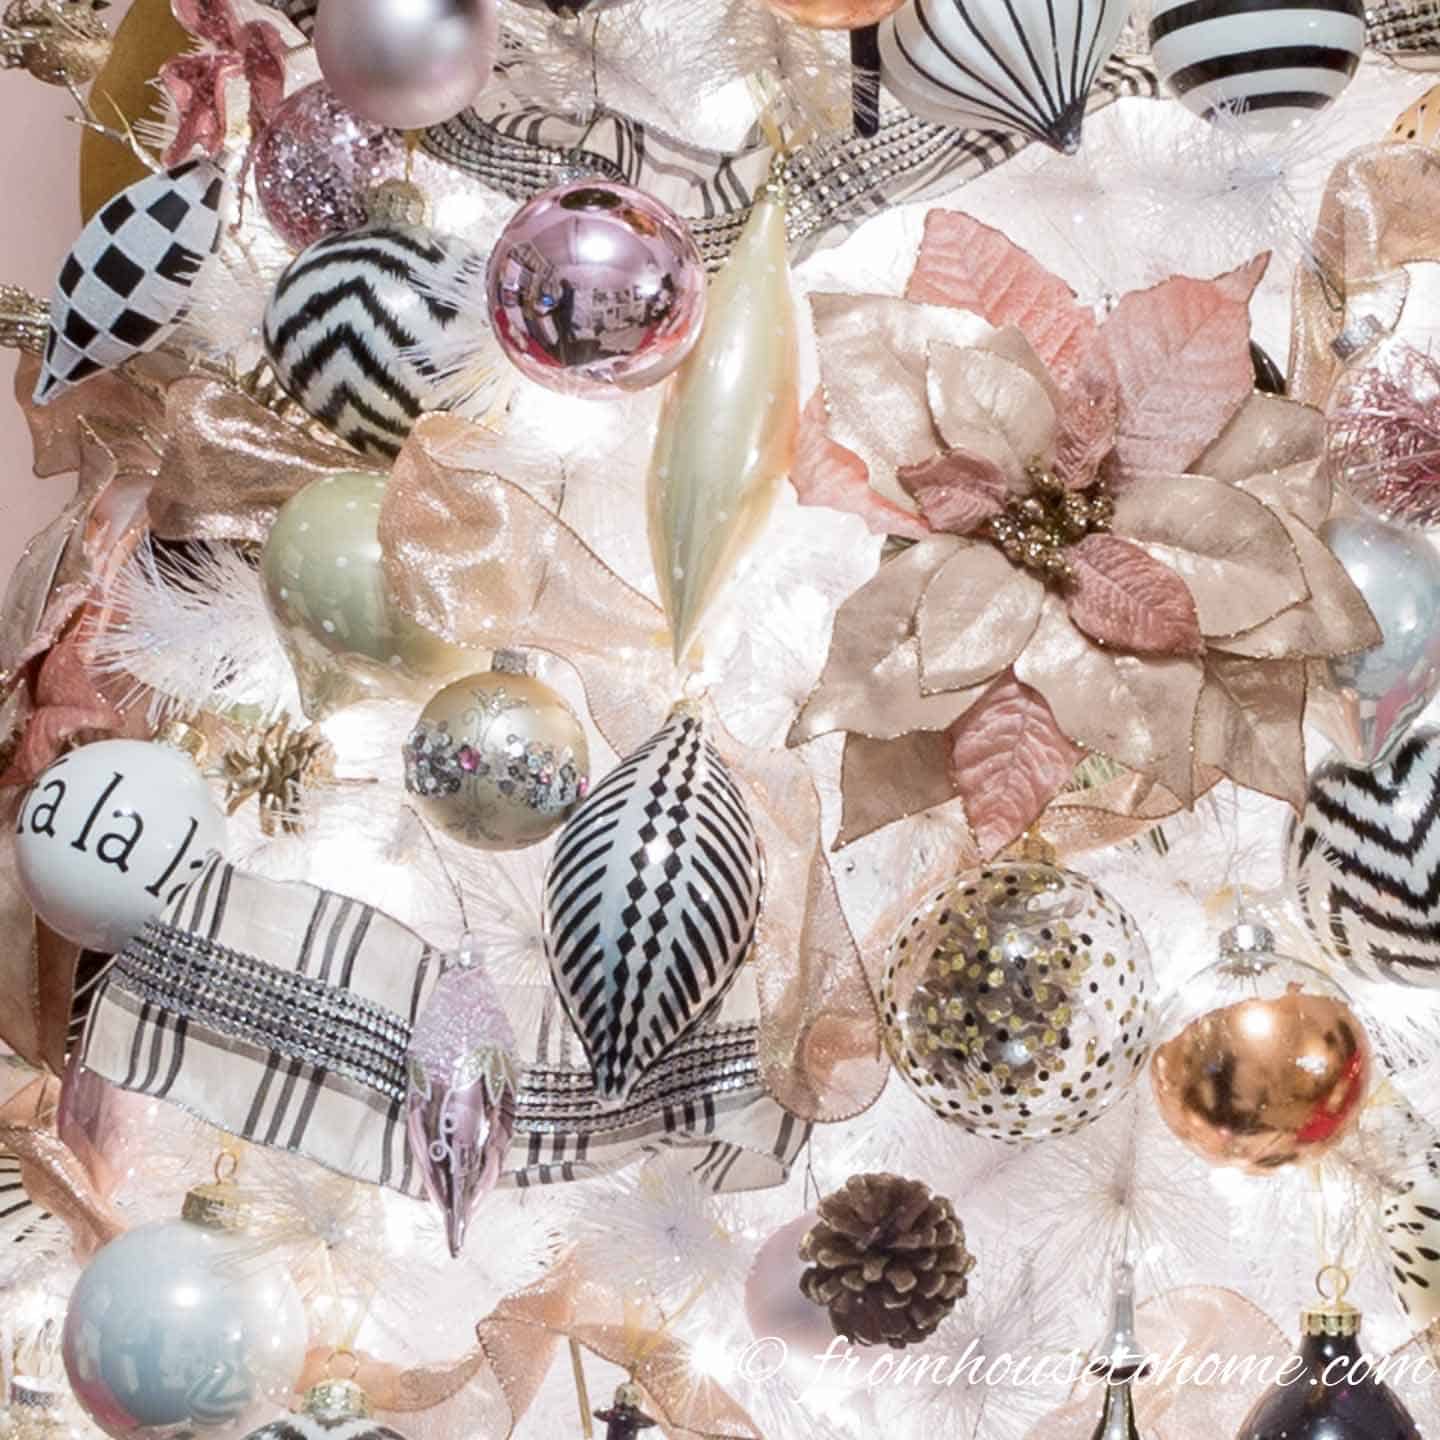 Black and white ornaments with pink ornaments and back and white ribbon on a Christmas tree